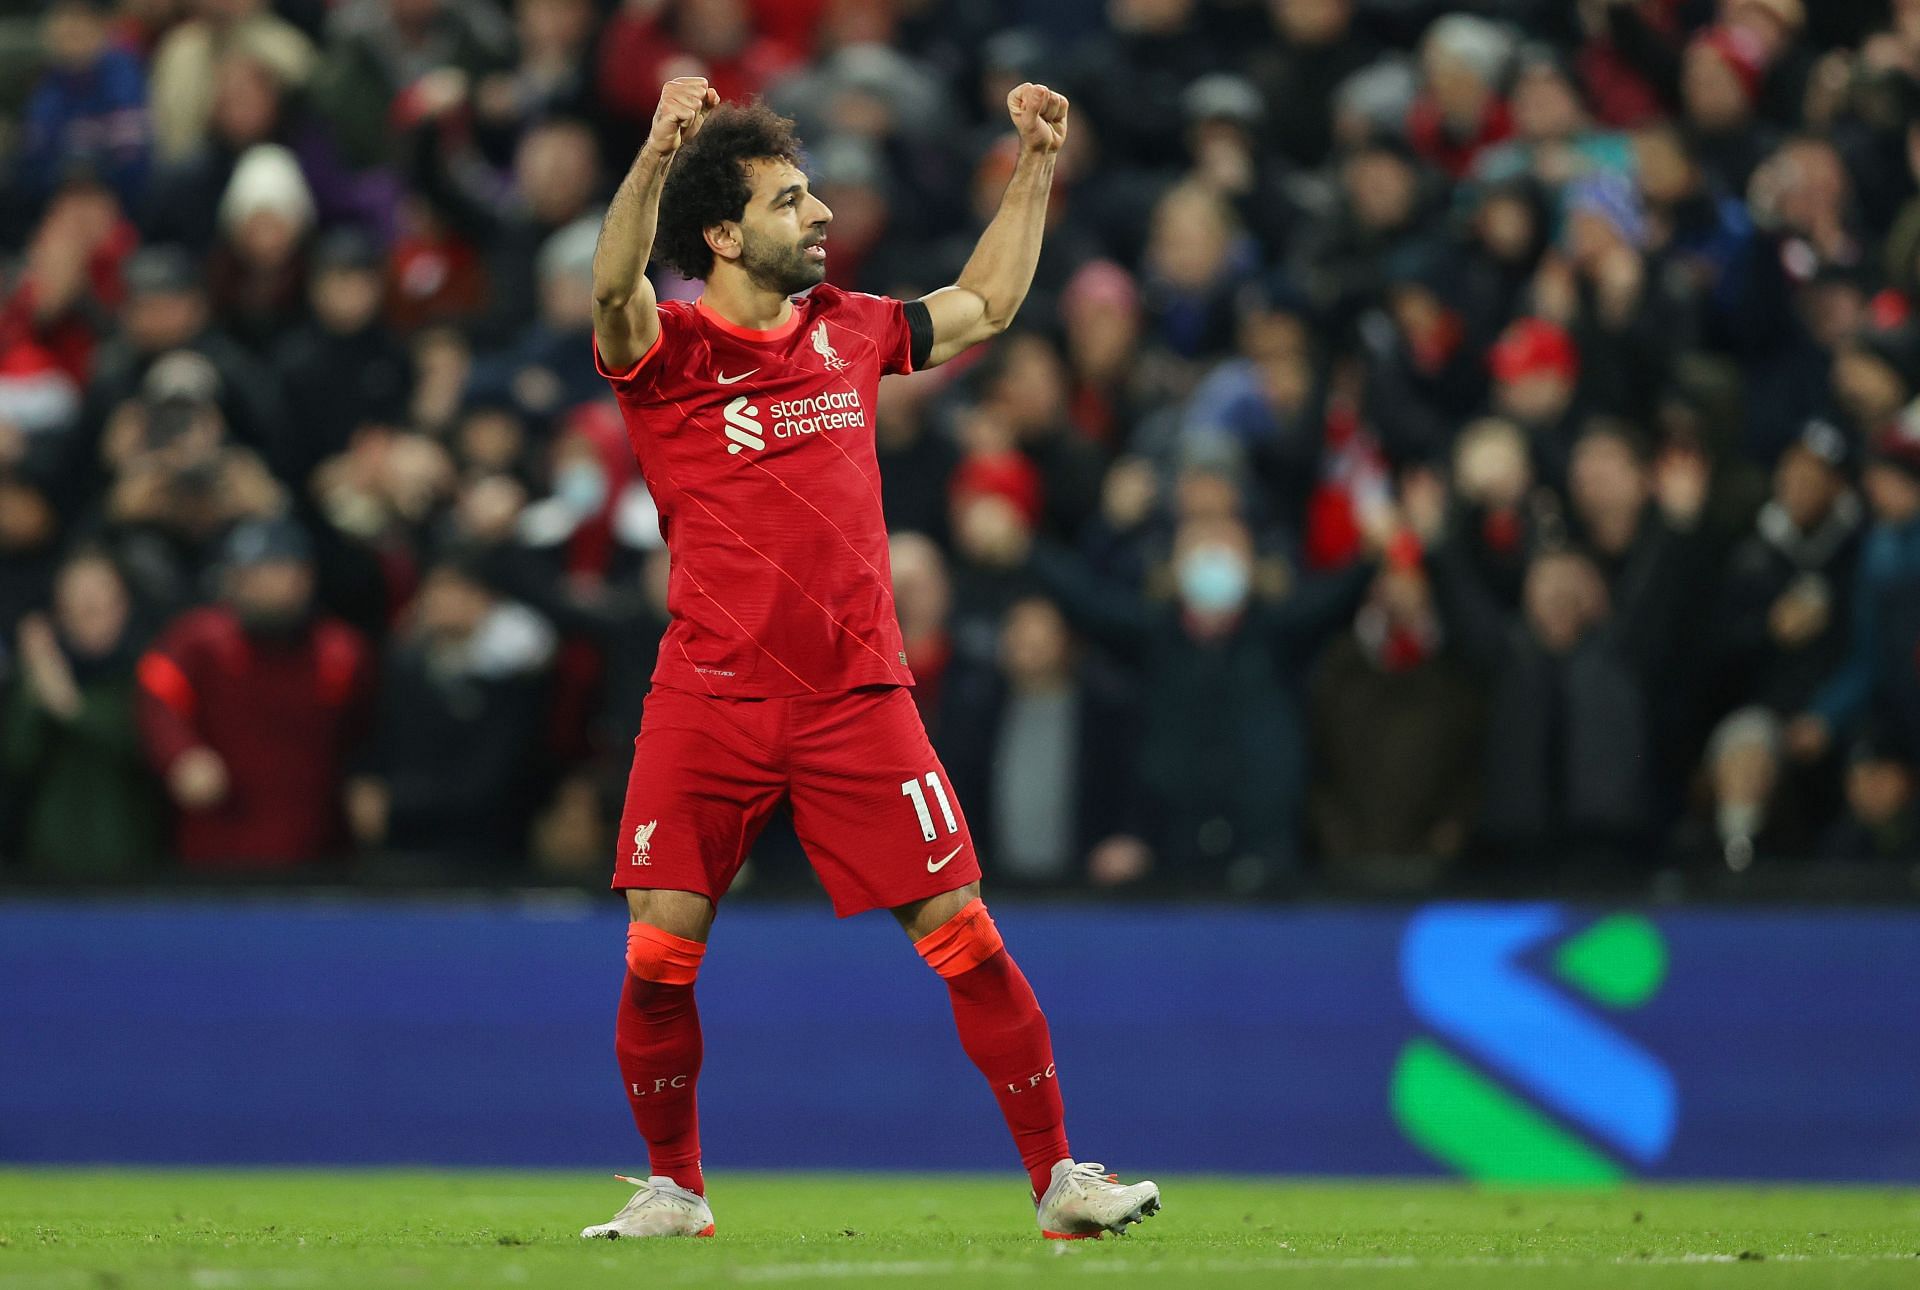 Mo Salah is looking to break more records with Liverpool this season